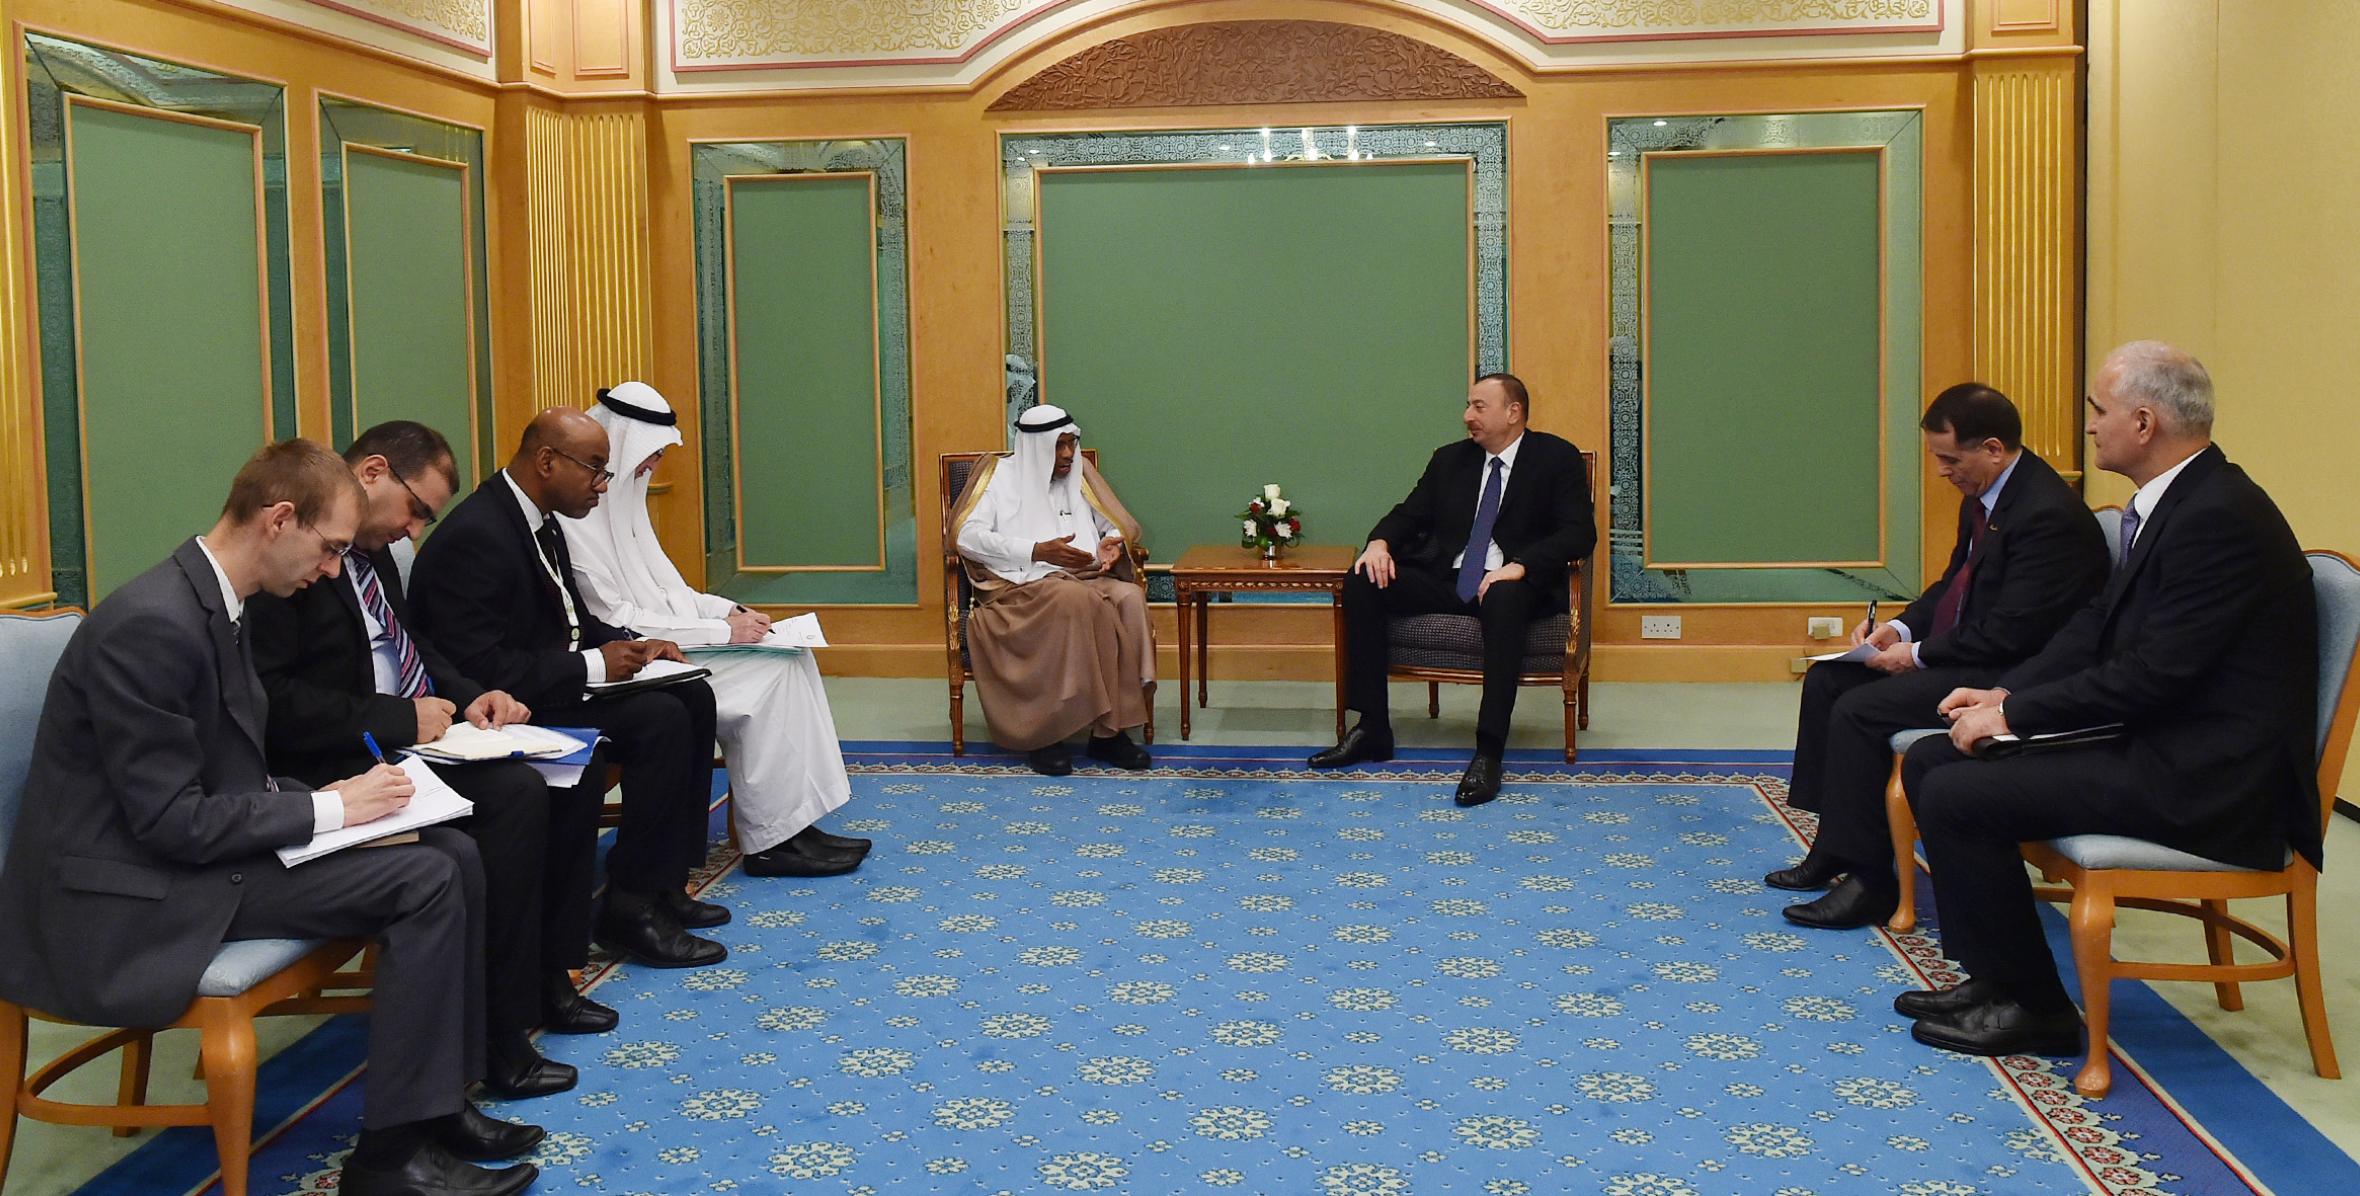 Ilham Aliyev met with the President of the Islamic Development Bank Group